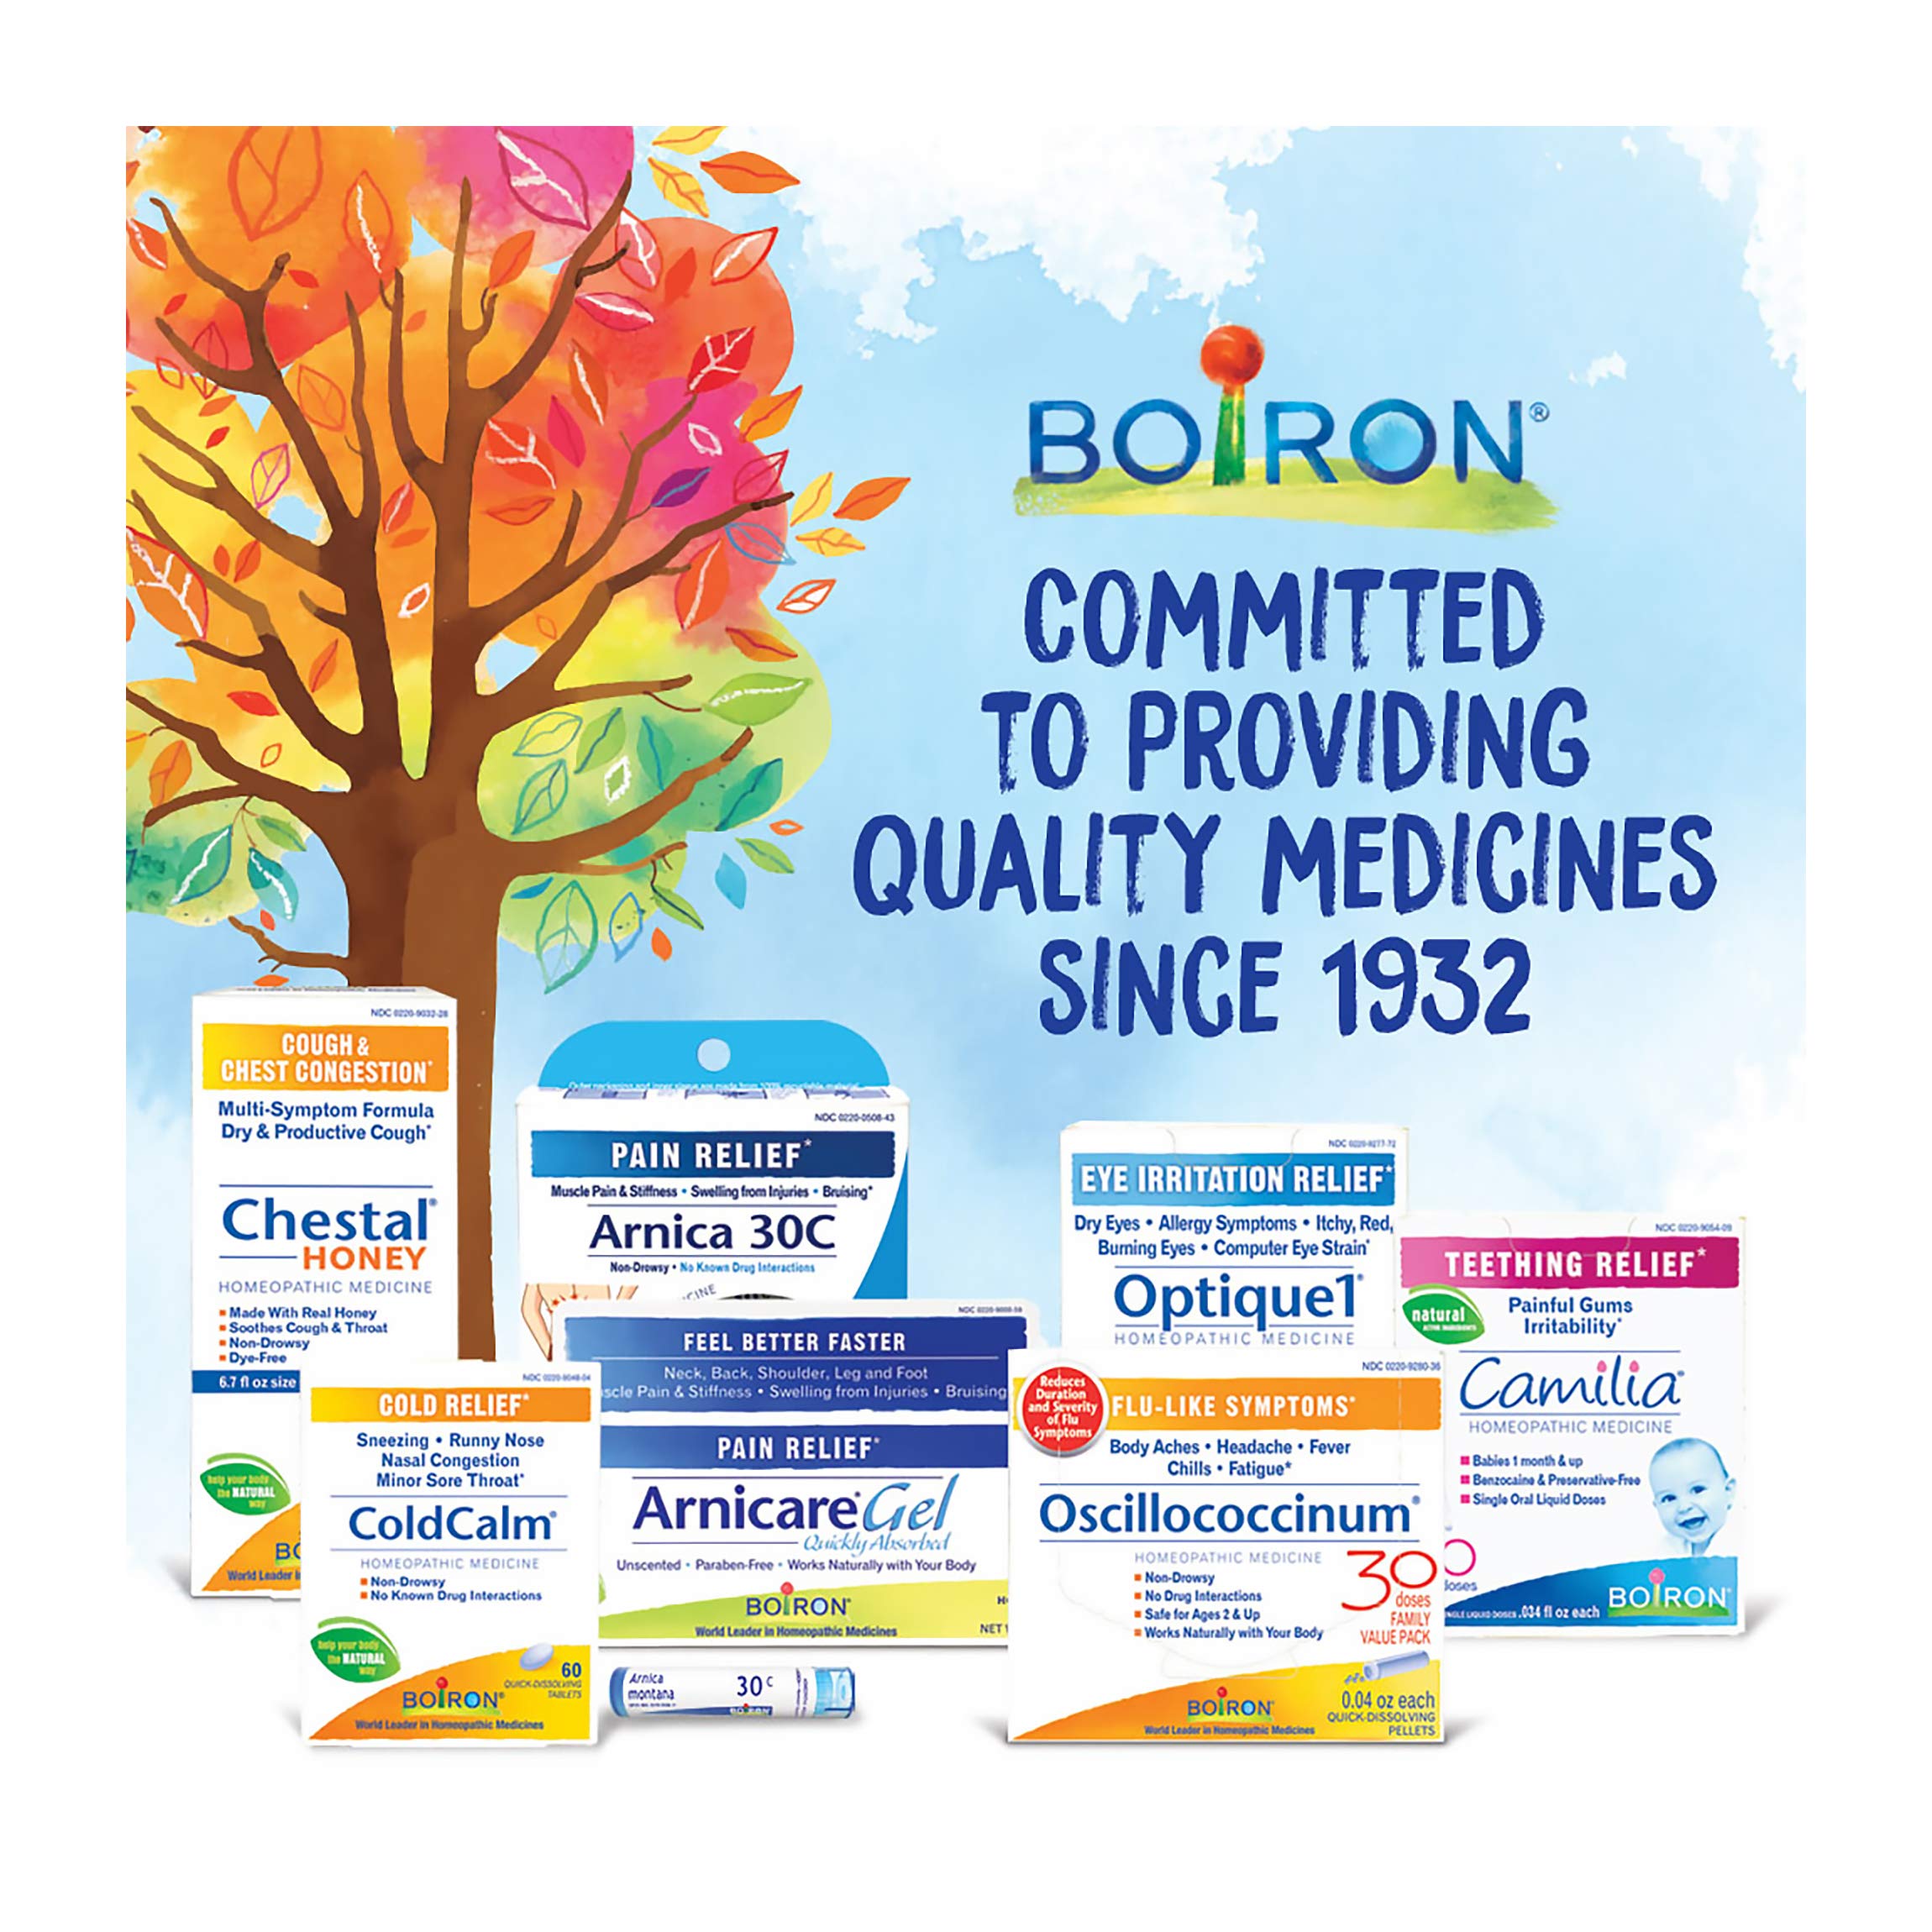 Boiron Causticum 30C Homeopathic Medicine for Bed-wetting and Bladder Incontinence